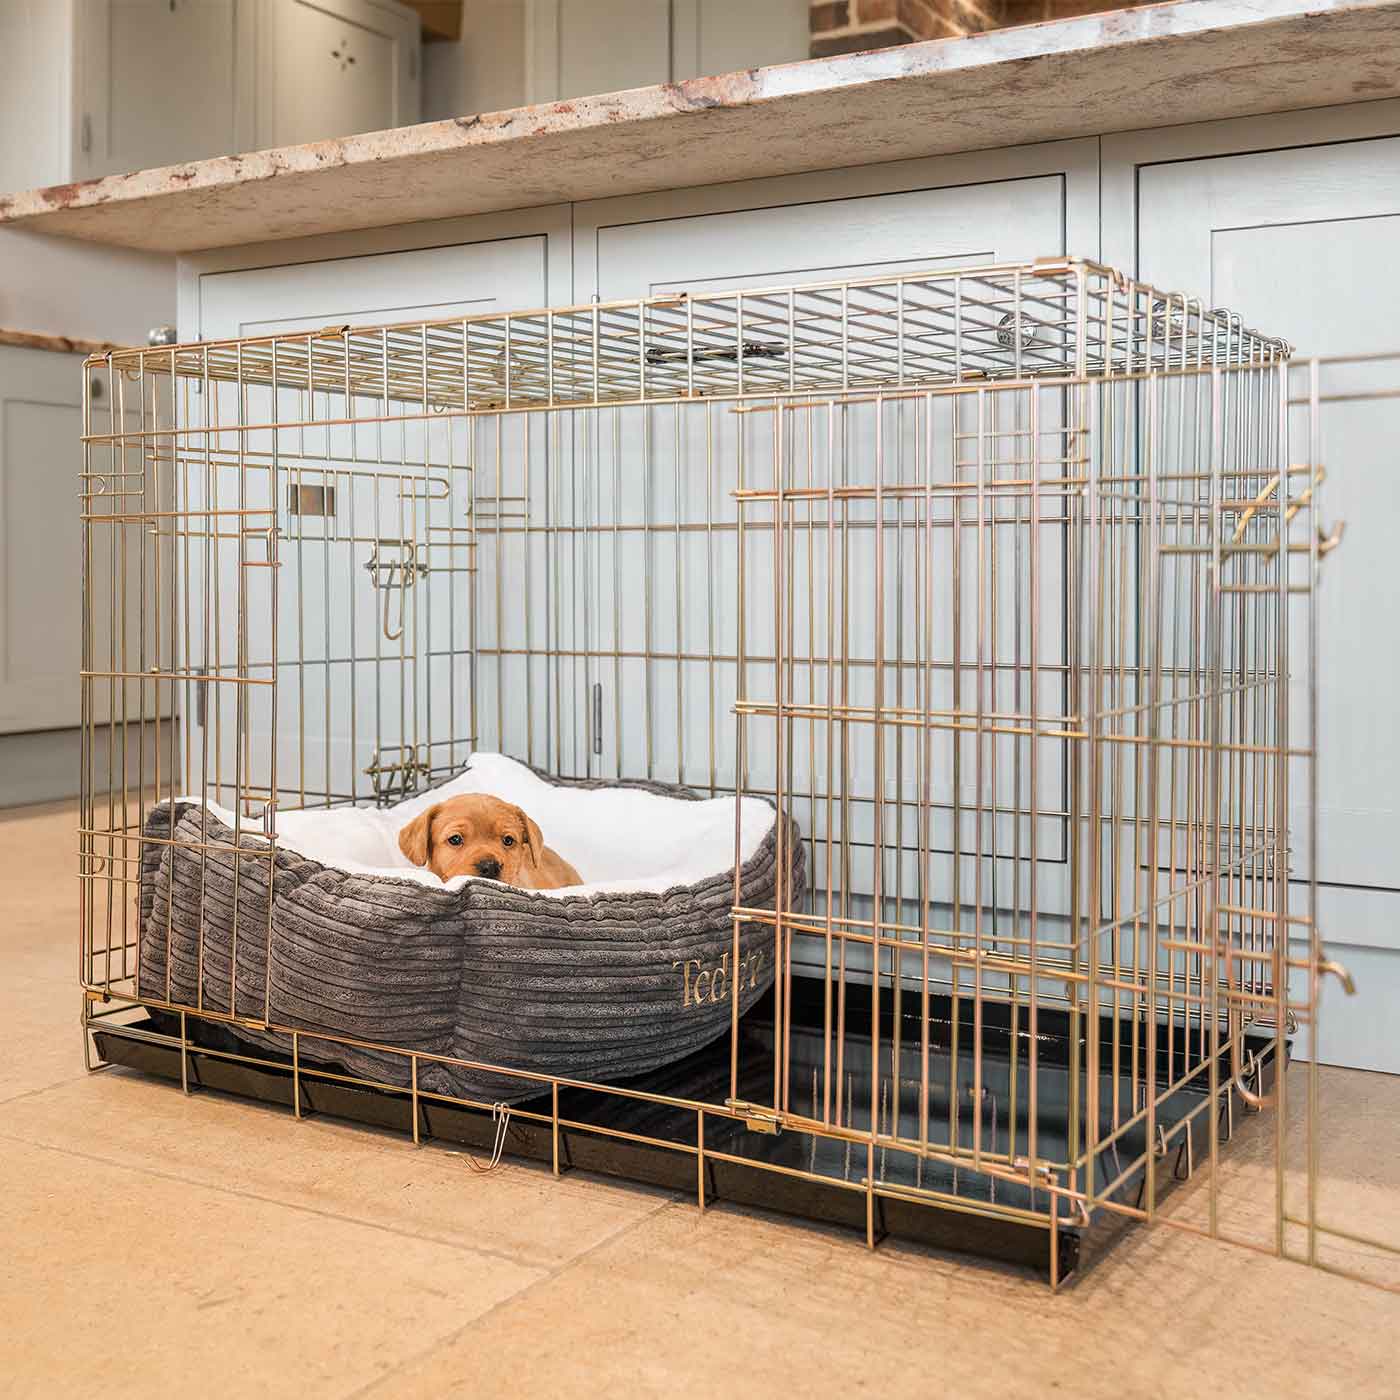  Cosy & Calm Puppy Crate Bed, The Perfect Dog Crate Accessory For The Ultimate Dog Den! In Stunning Dark Grey Essentials Plush! Available Now at Lords & Labradors